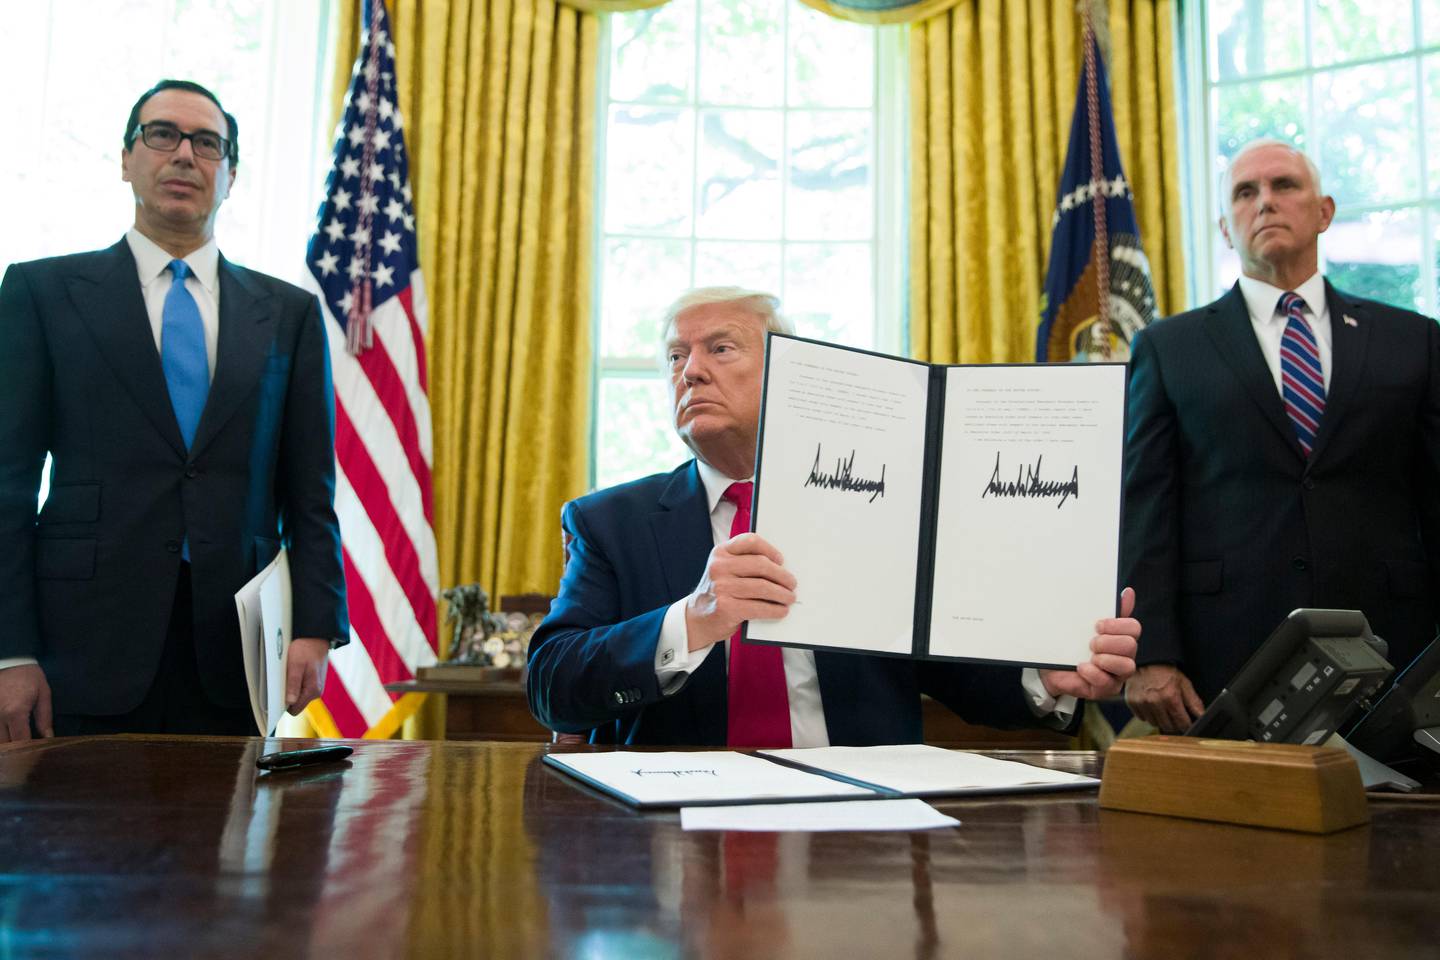 FILE - In this Monday, June 24, 2019 file photo, President Donald Trump holds up a signed executive order to increase sanctions on Iran, accompanied by Treasury Secretary Steve Mnuchin, left, and Vice President Mike Pence, in the Oval Office of the White House, in Washington. A year after President TrumpÄôs unilateral withdrawal from the 2015 deal, the U.S. and Iran are already locked in a volatile standoff. (AP Photo/Alex Brandon, File)